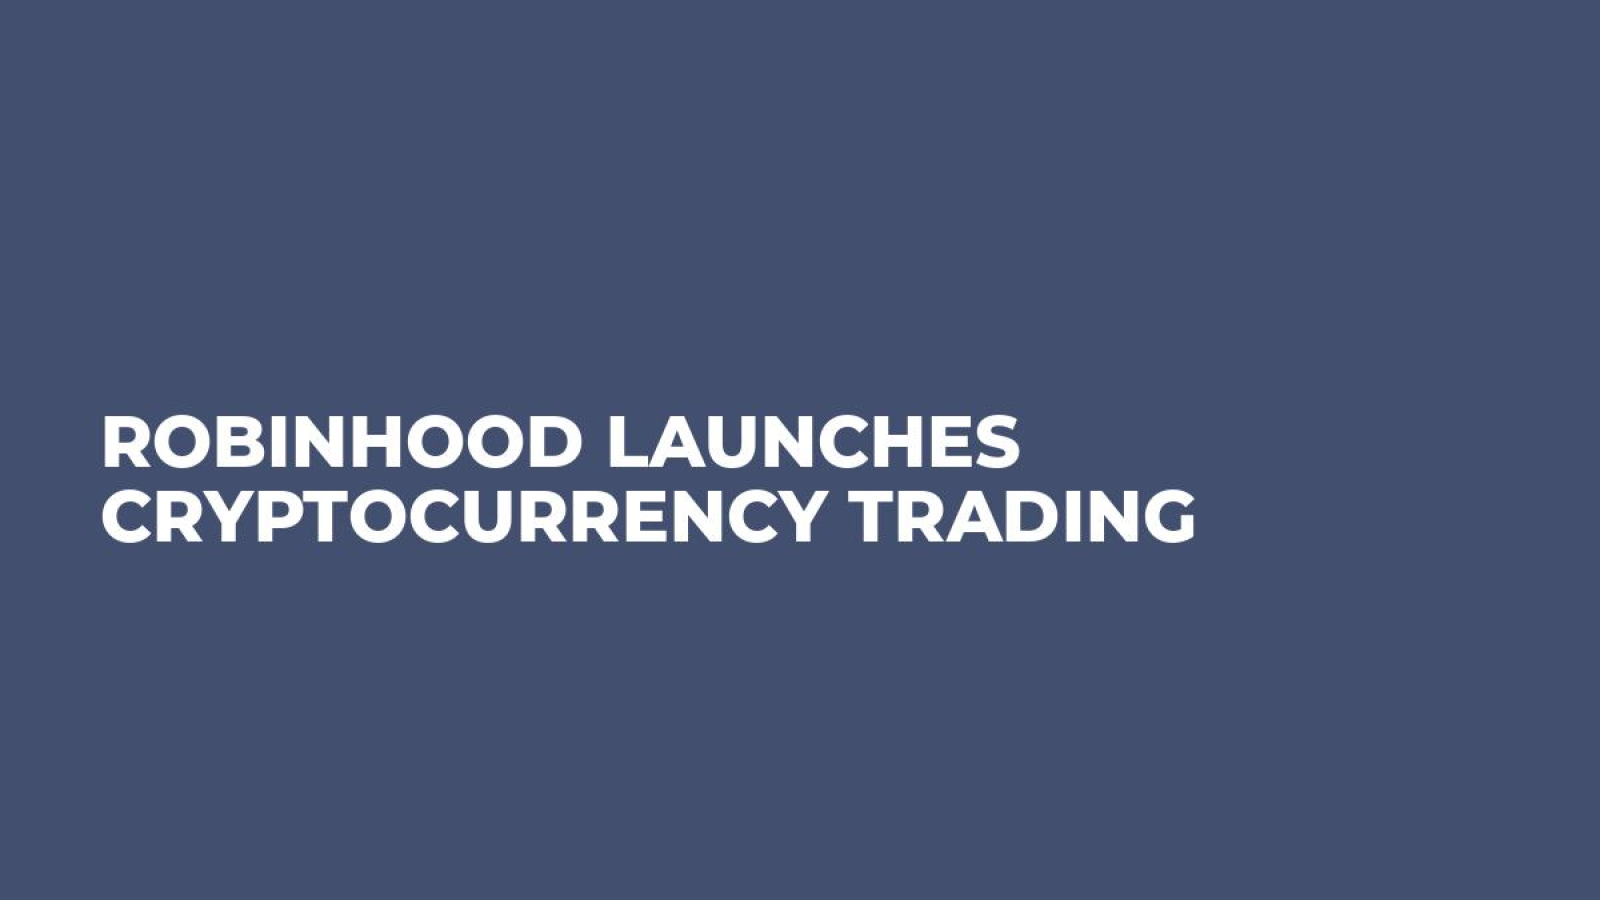 Robinhood Launches Cryptocurrency Trading